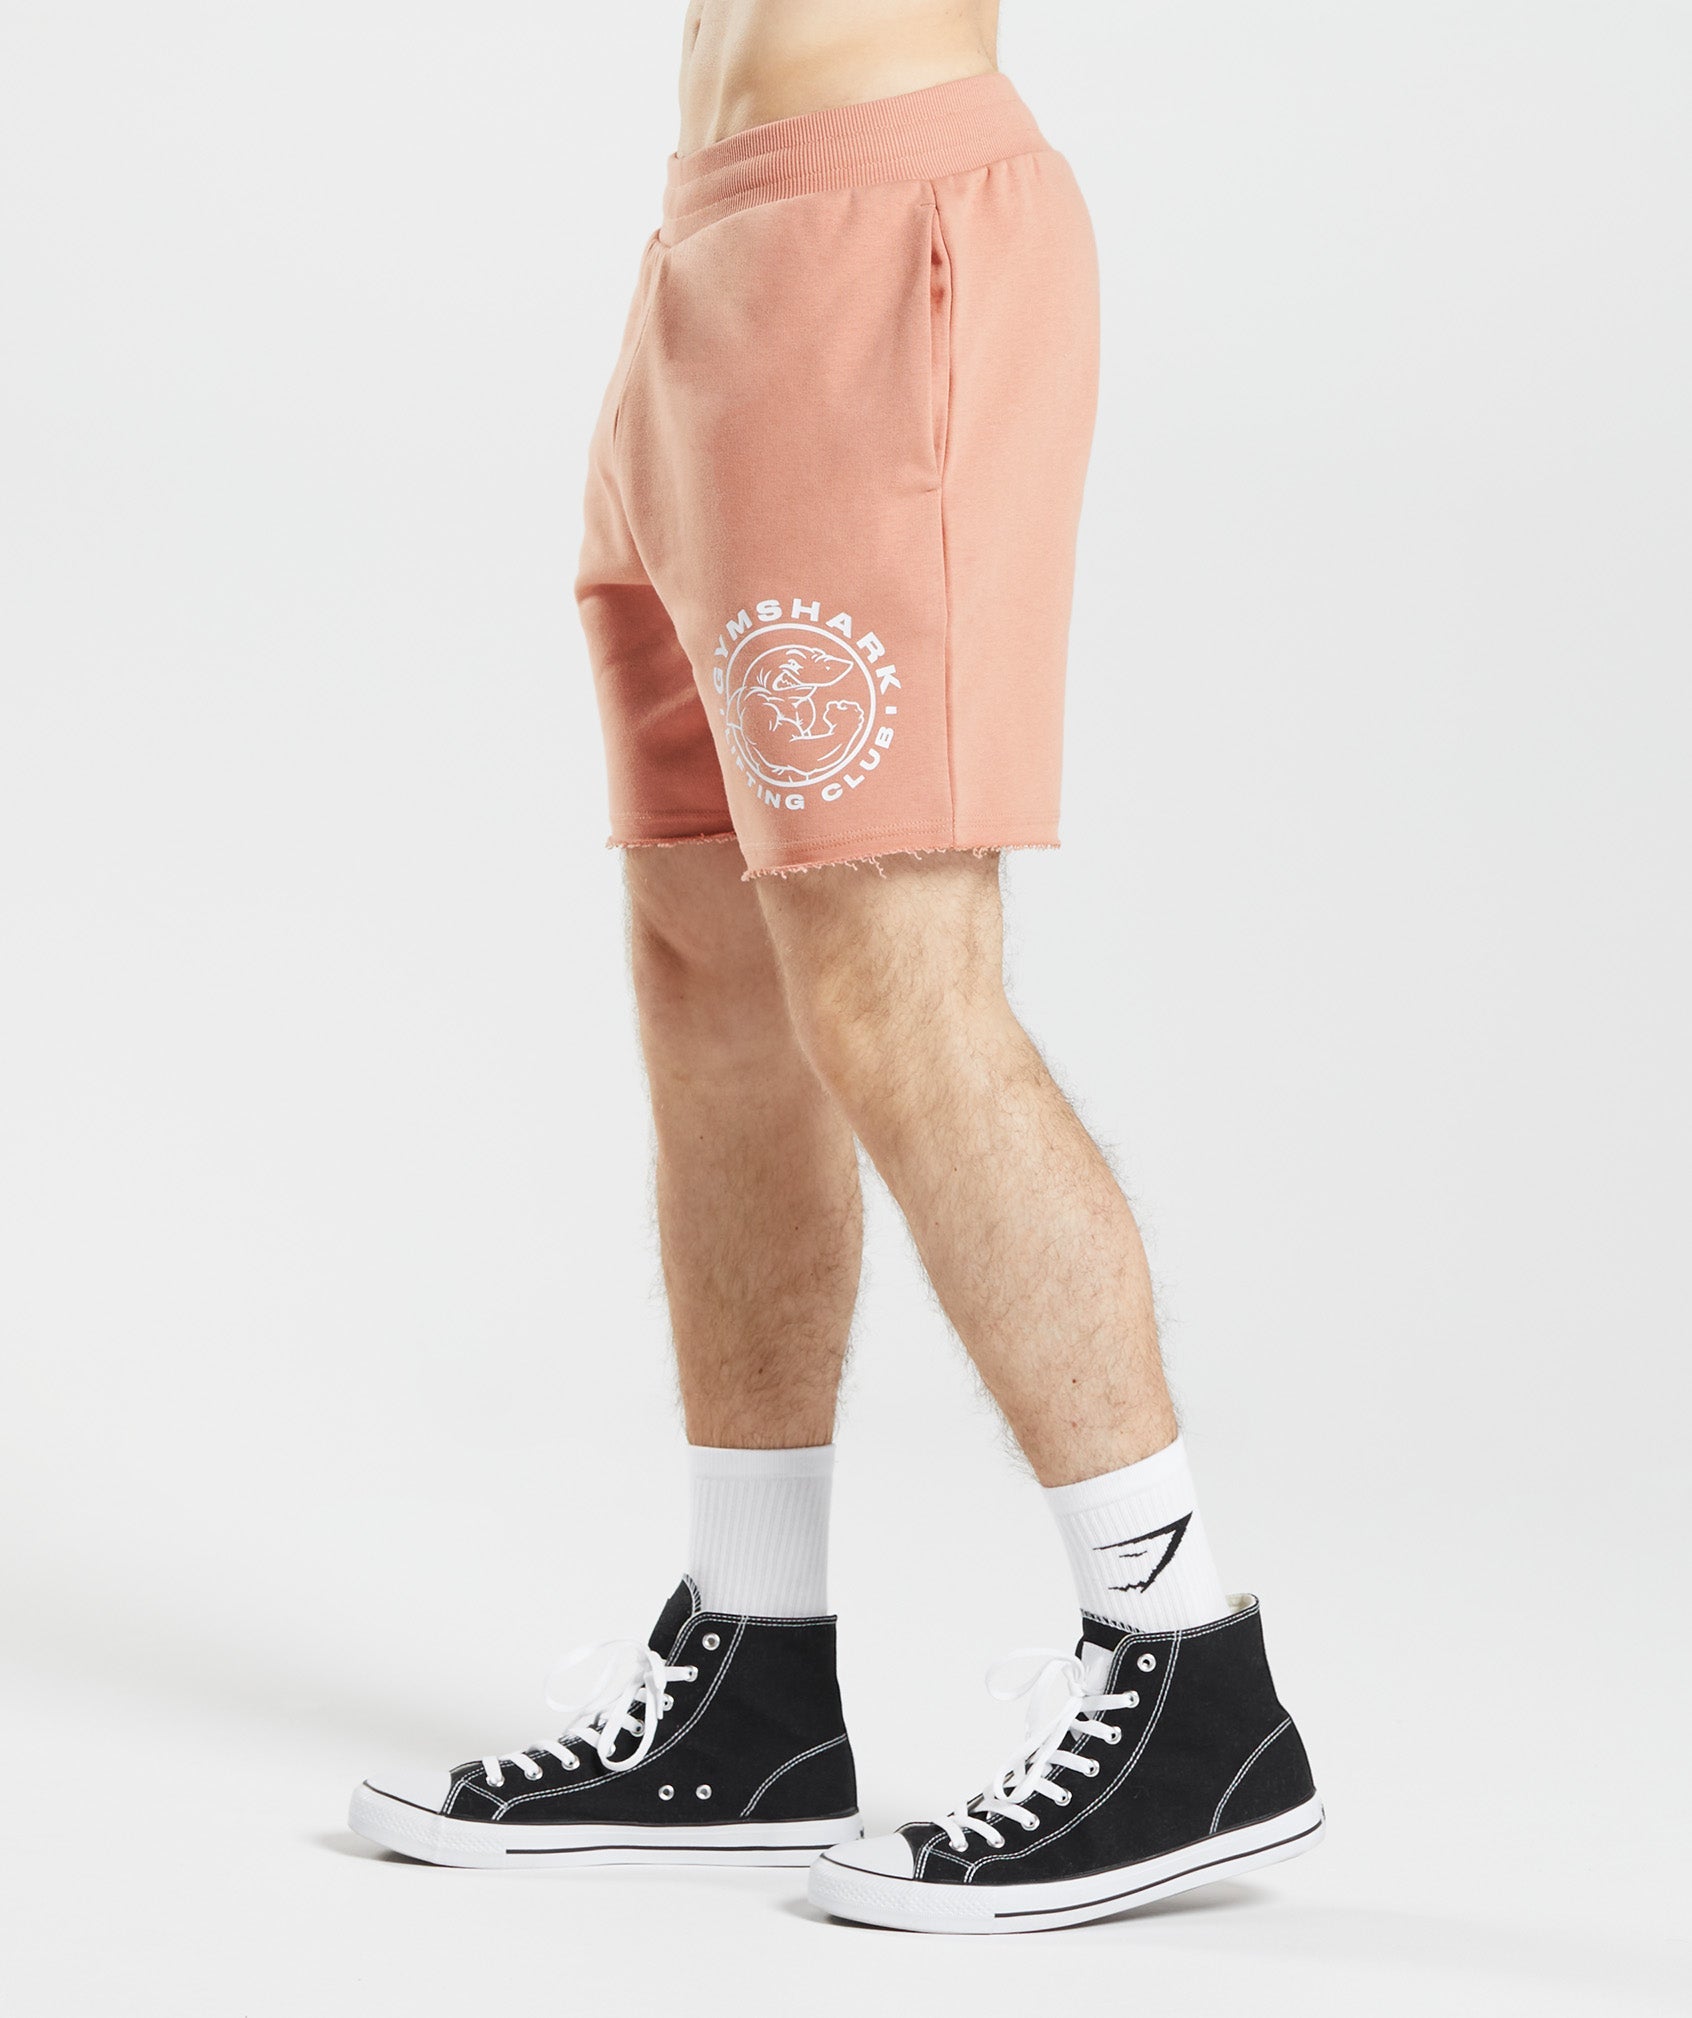 Legacy Shorts in Nevada Pink - view 3